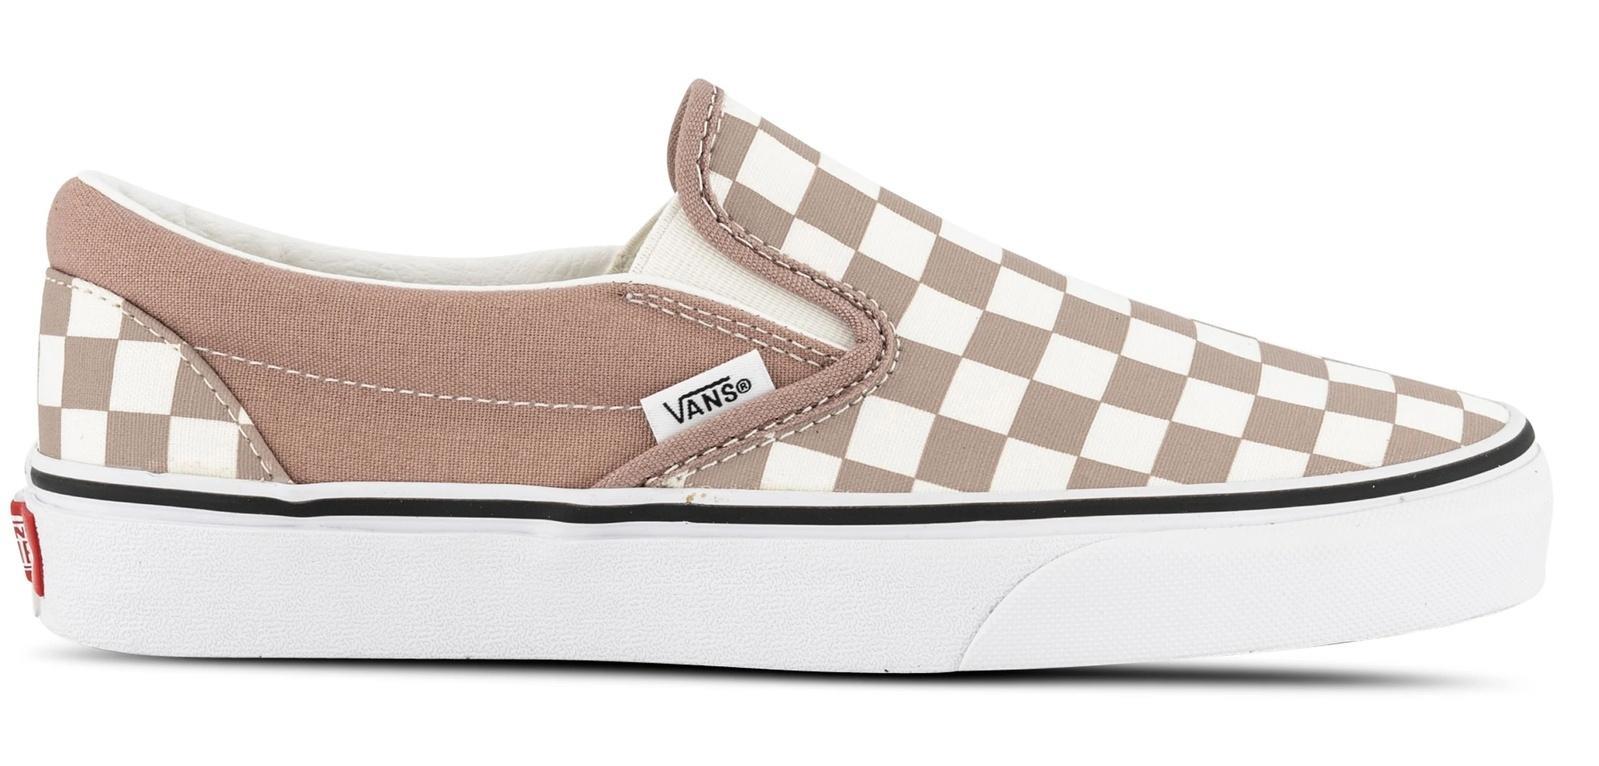 Vans Classic Slip On Canvas Sneaker Shoes Chess Check - Etherea/True White - US 11